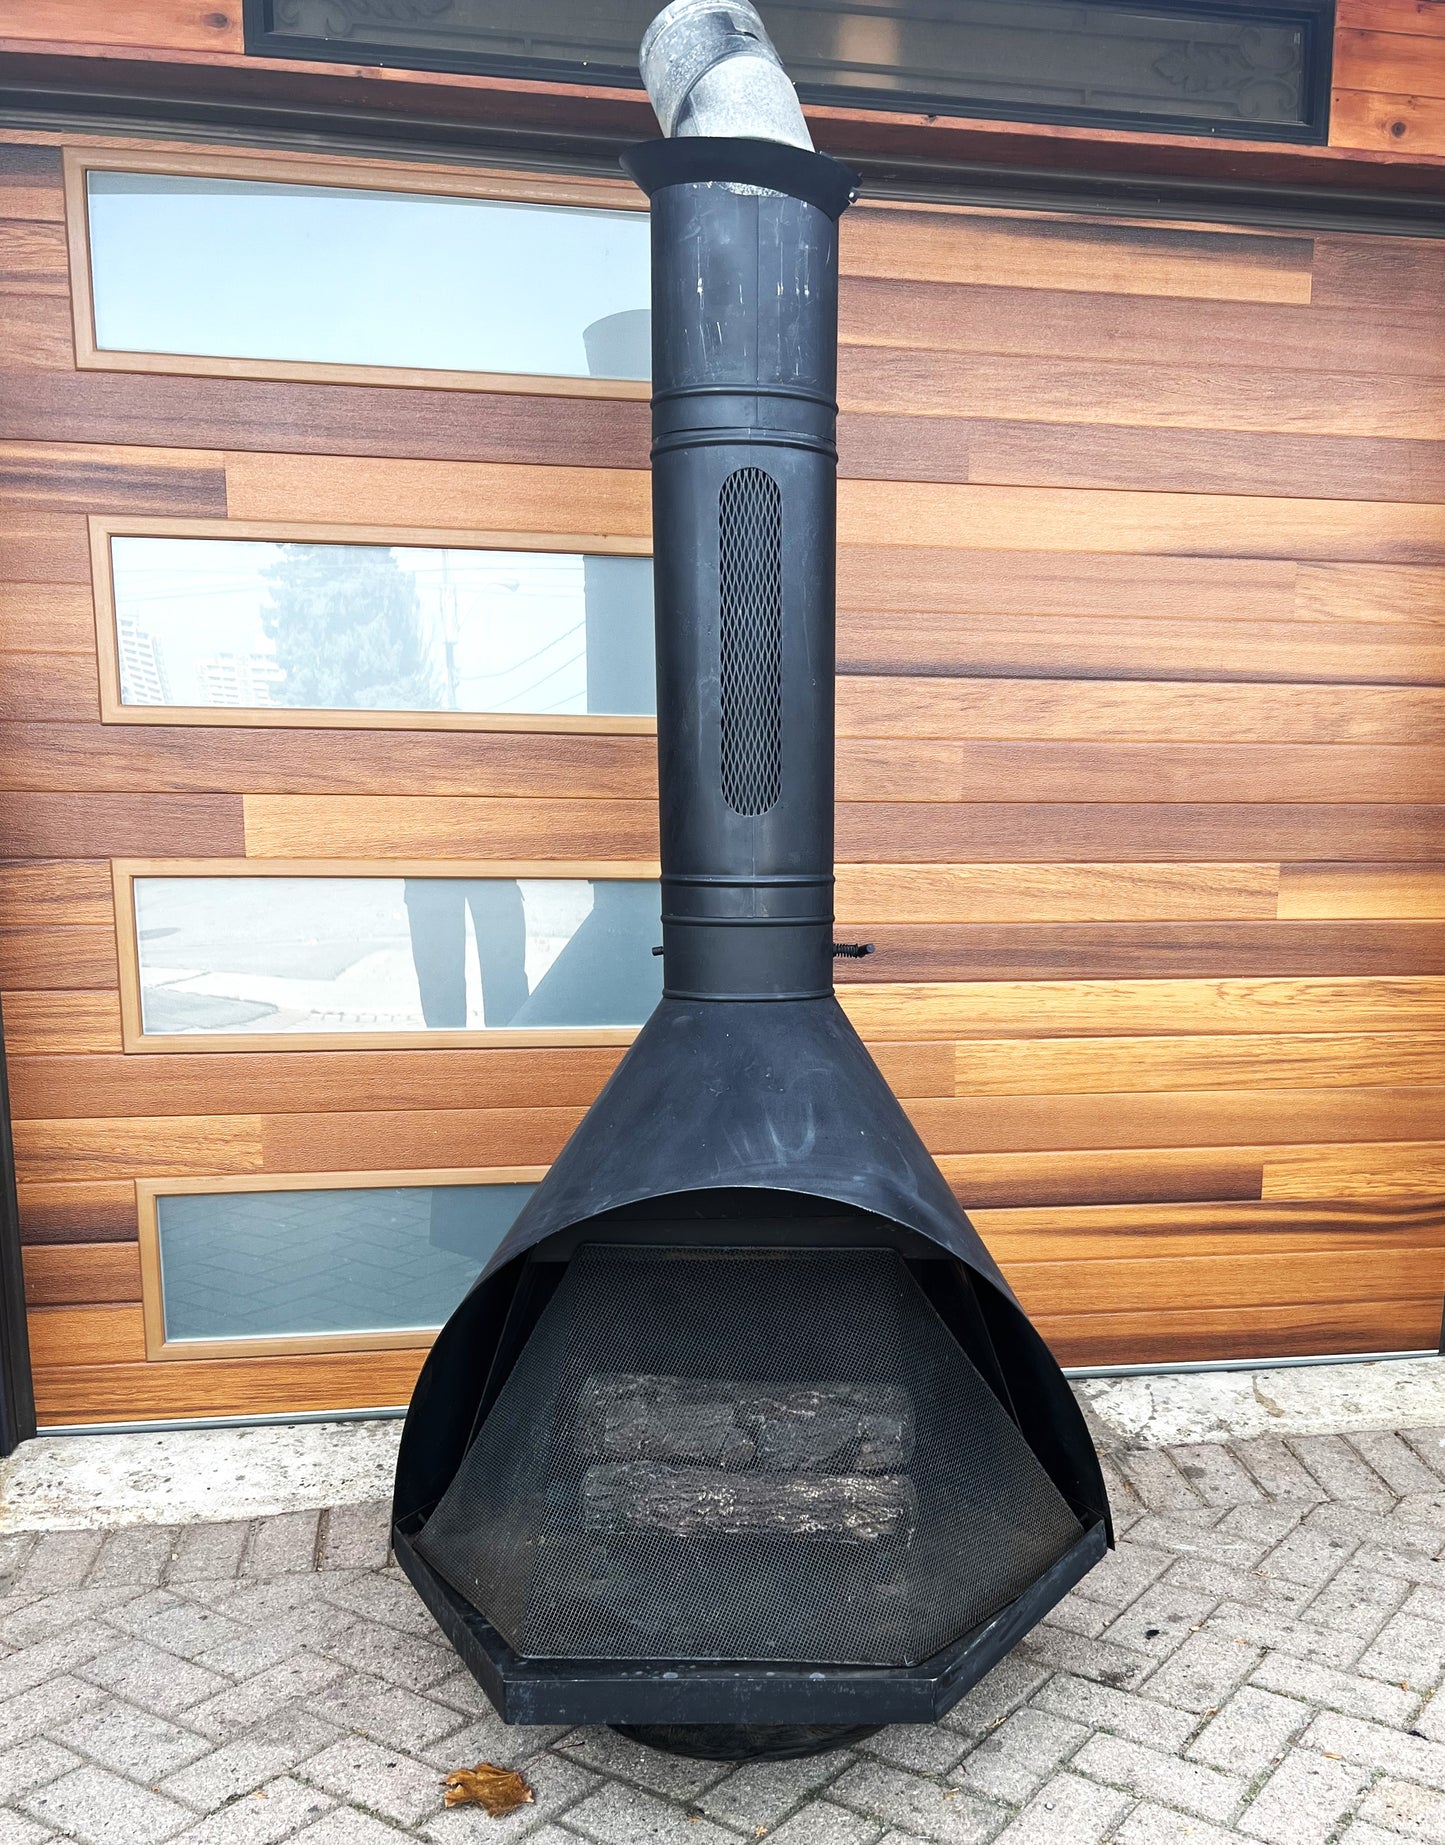 COMING***Vintage Mid Century Modern Acorn Fireplace Freestanding Cone shaped GAS